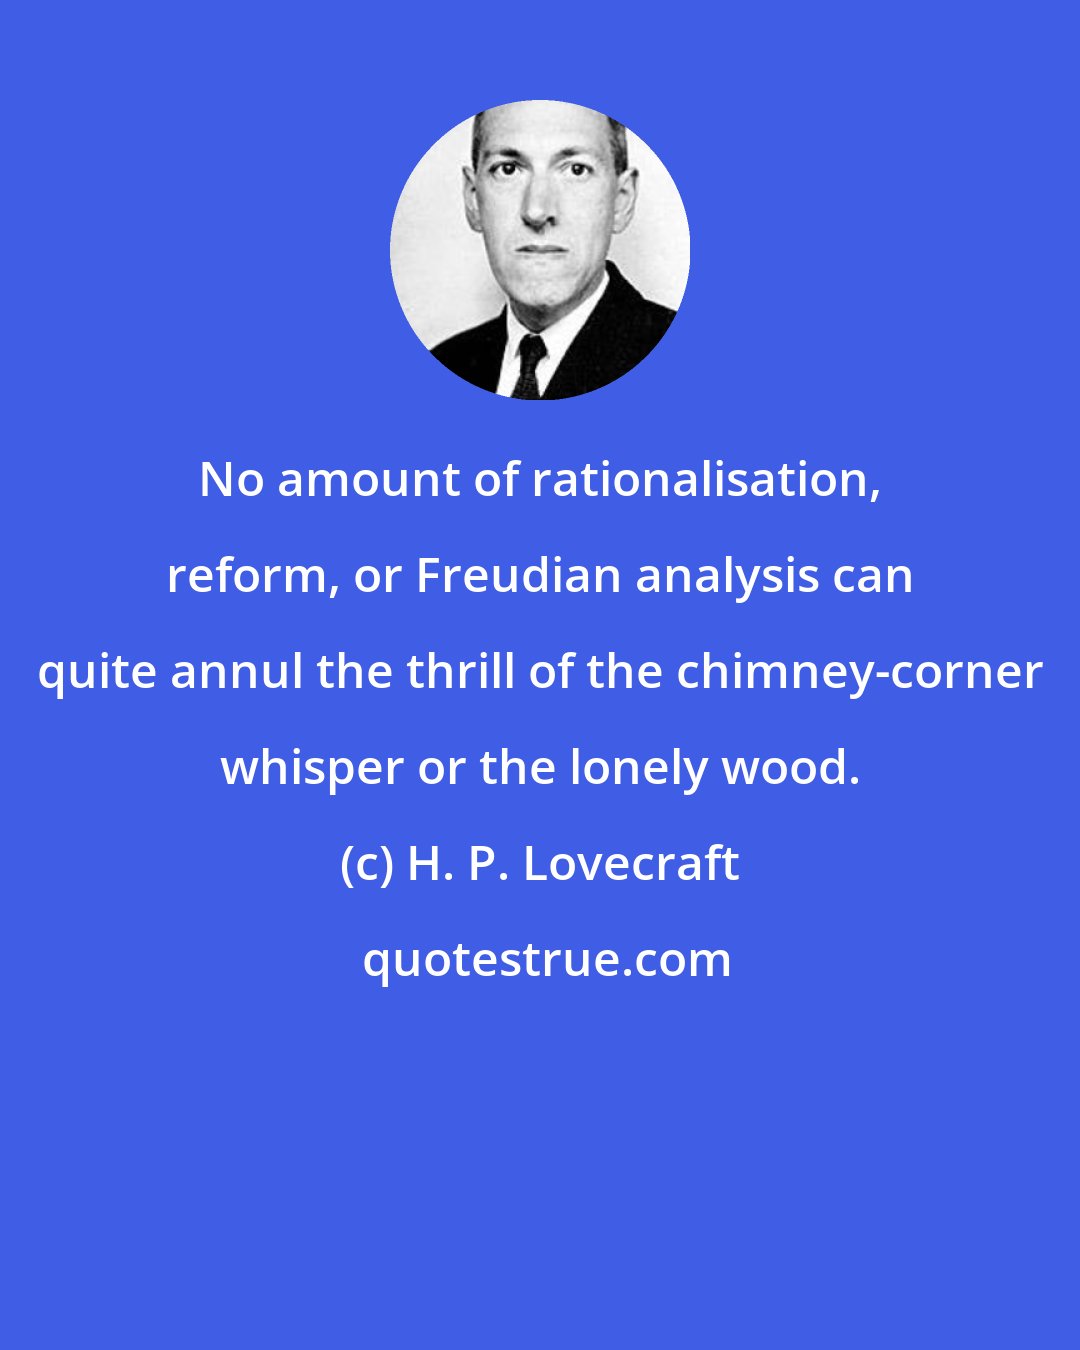 H. P. Lovecraft: No amount of rationalisation, reform, or Freudian analysis can quite annul the thrill of the chimney-corner whisper or the lonely wood.